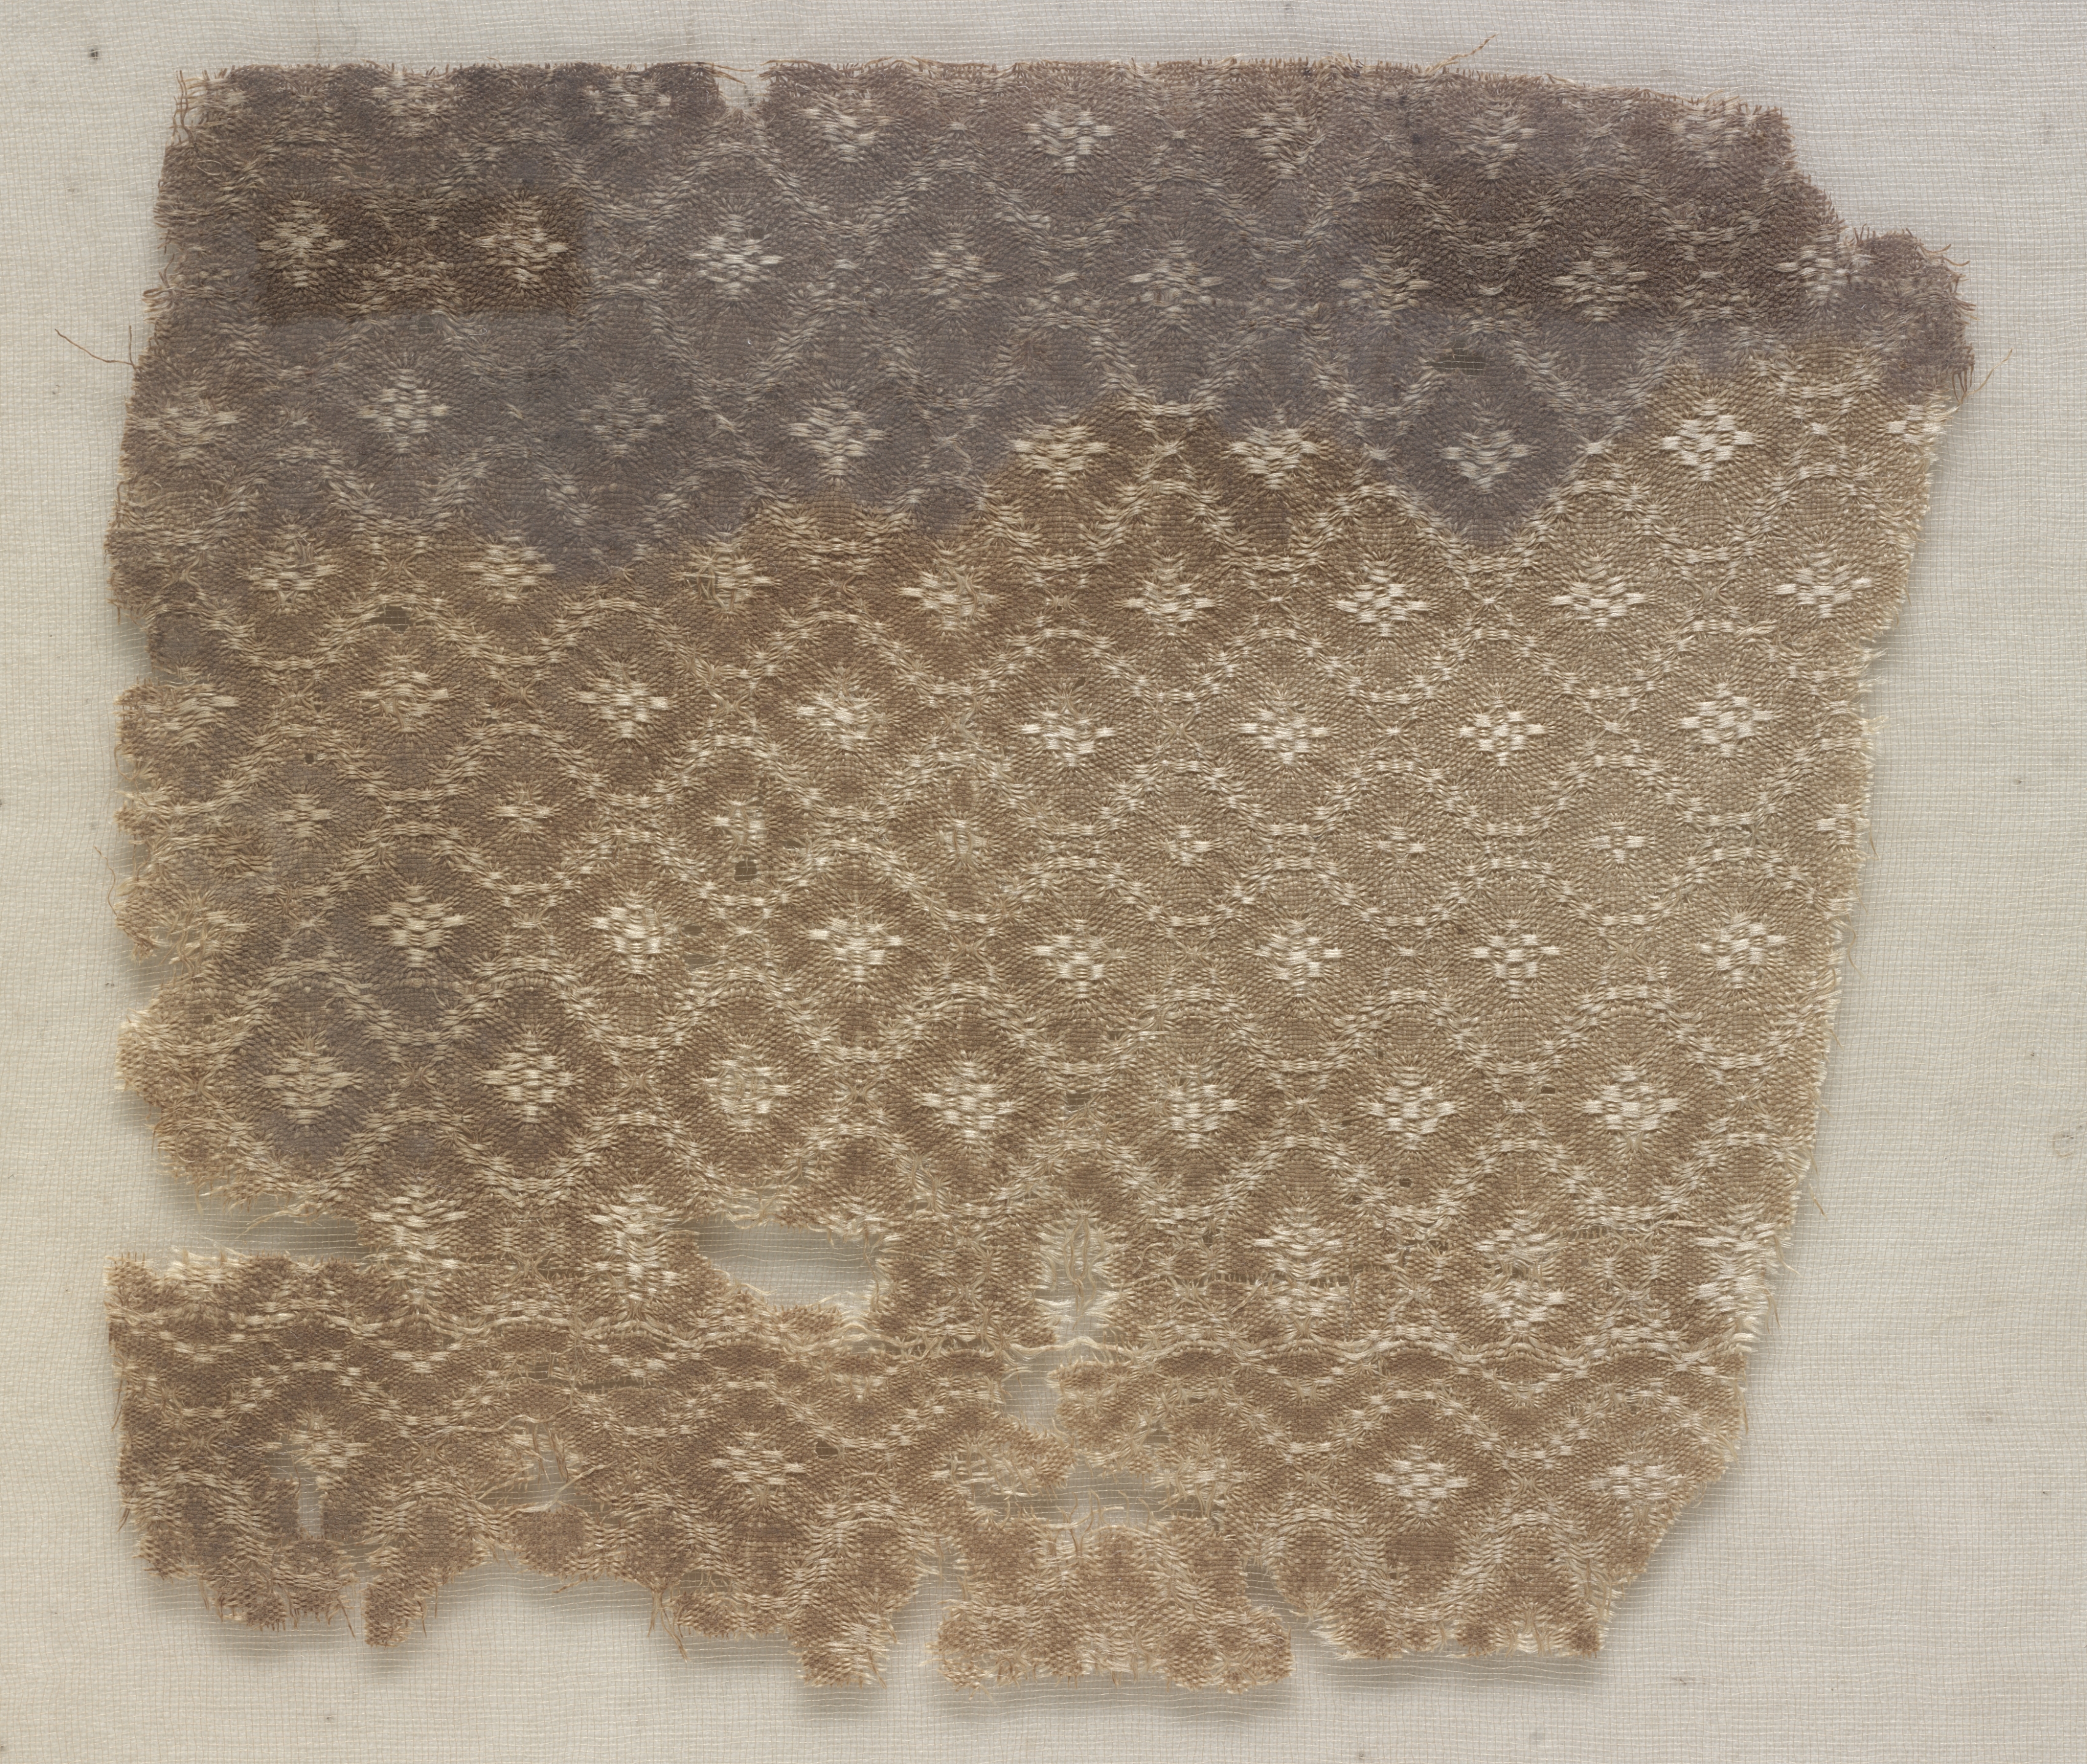 Silk Fragment, Probably from a Tunic